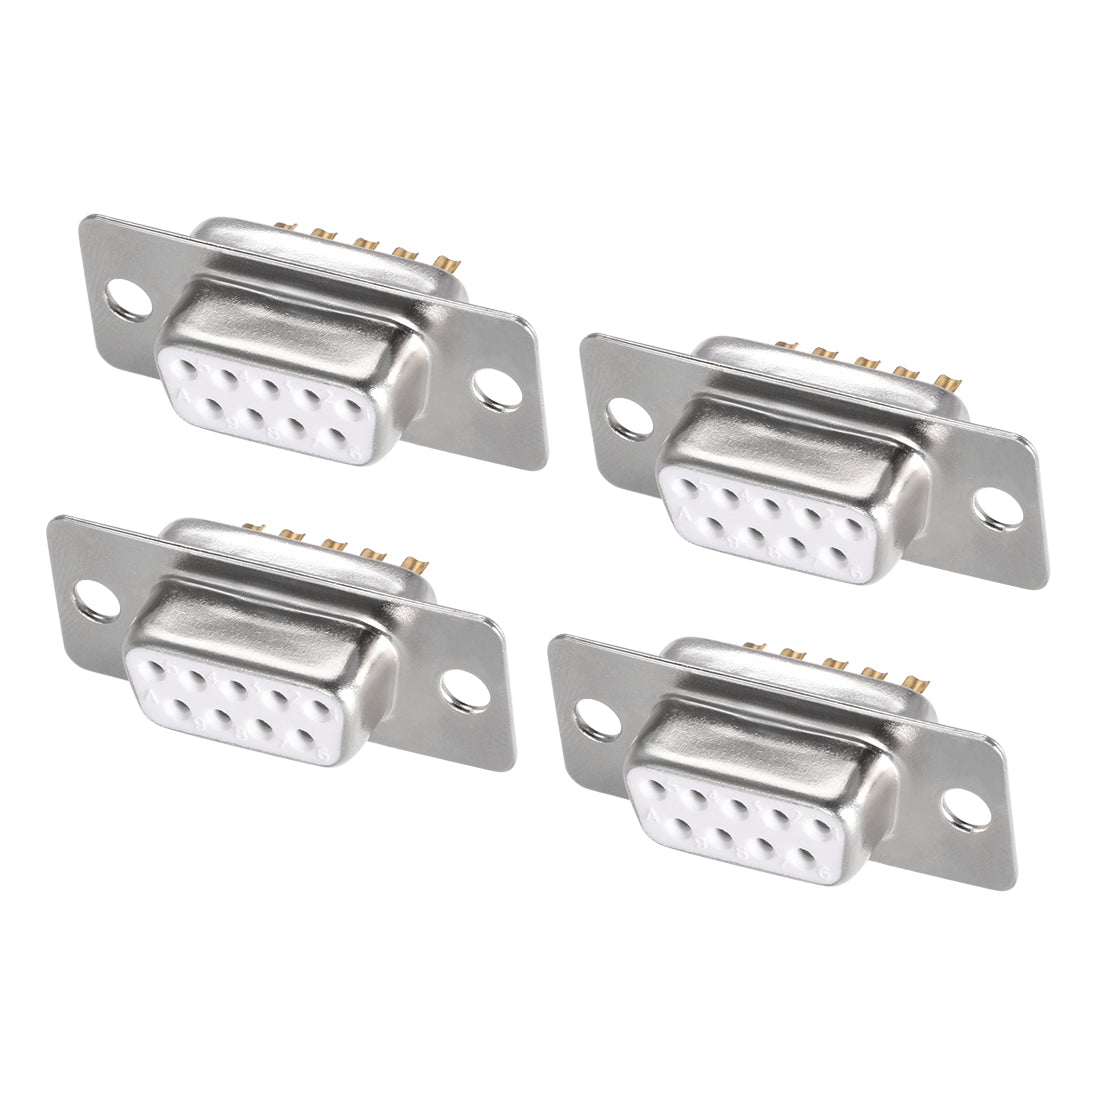 uxcell Uxcell D-sub Connector DB9 Female Socket 9-pin 2-row Port Terminal Breakout for Mechanical Equipment CNC Computers White 4pcs